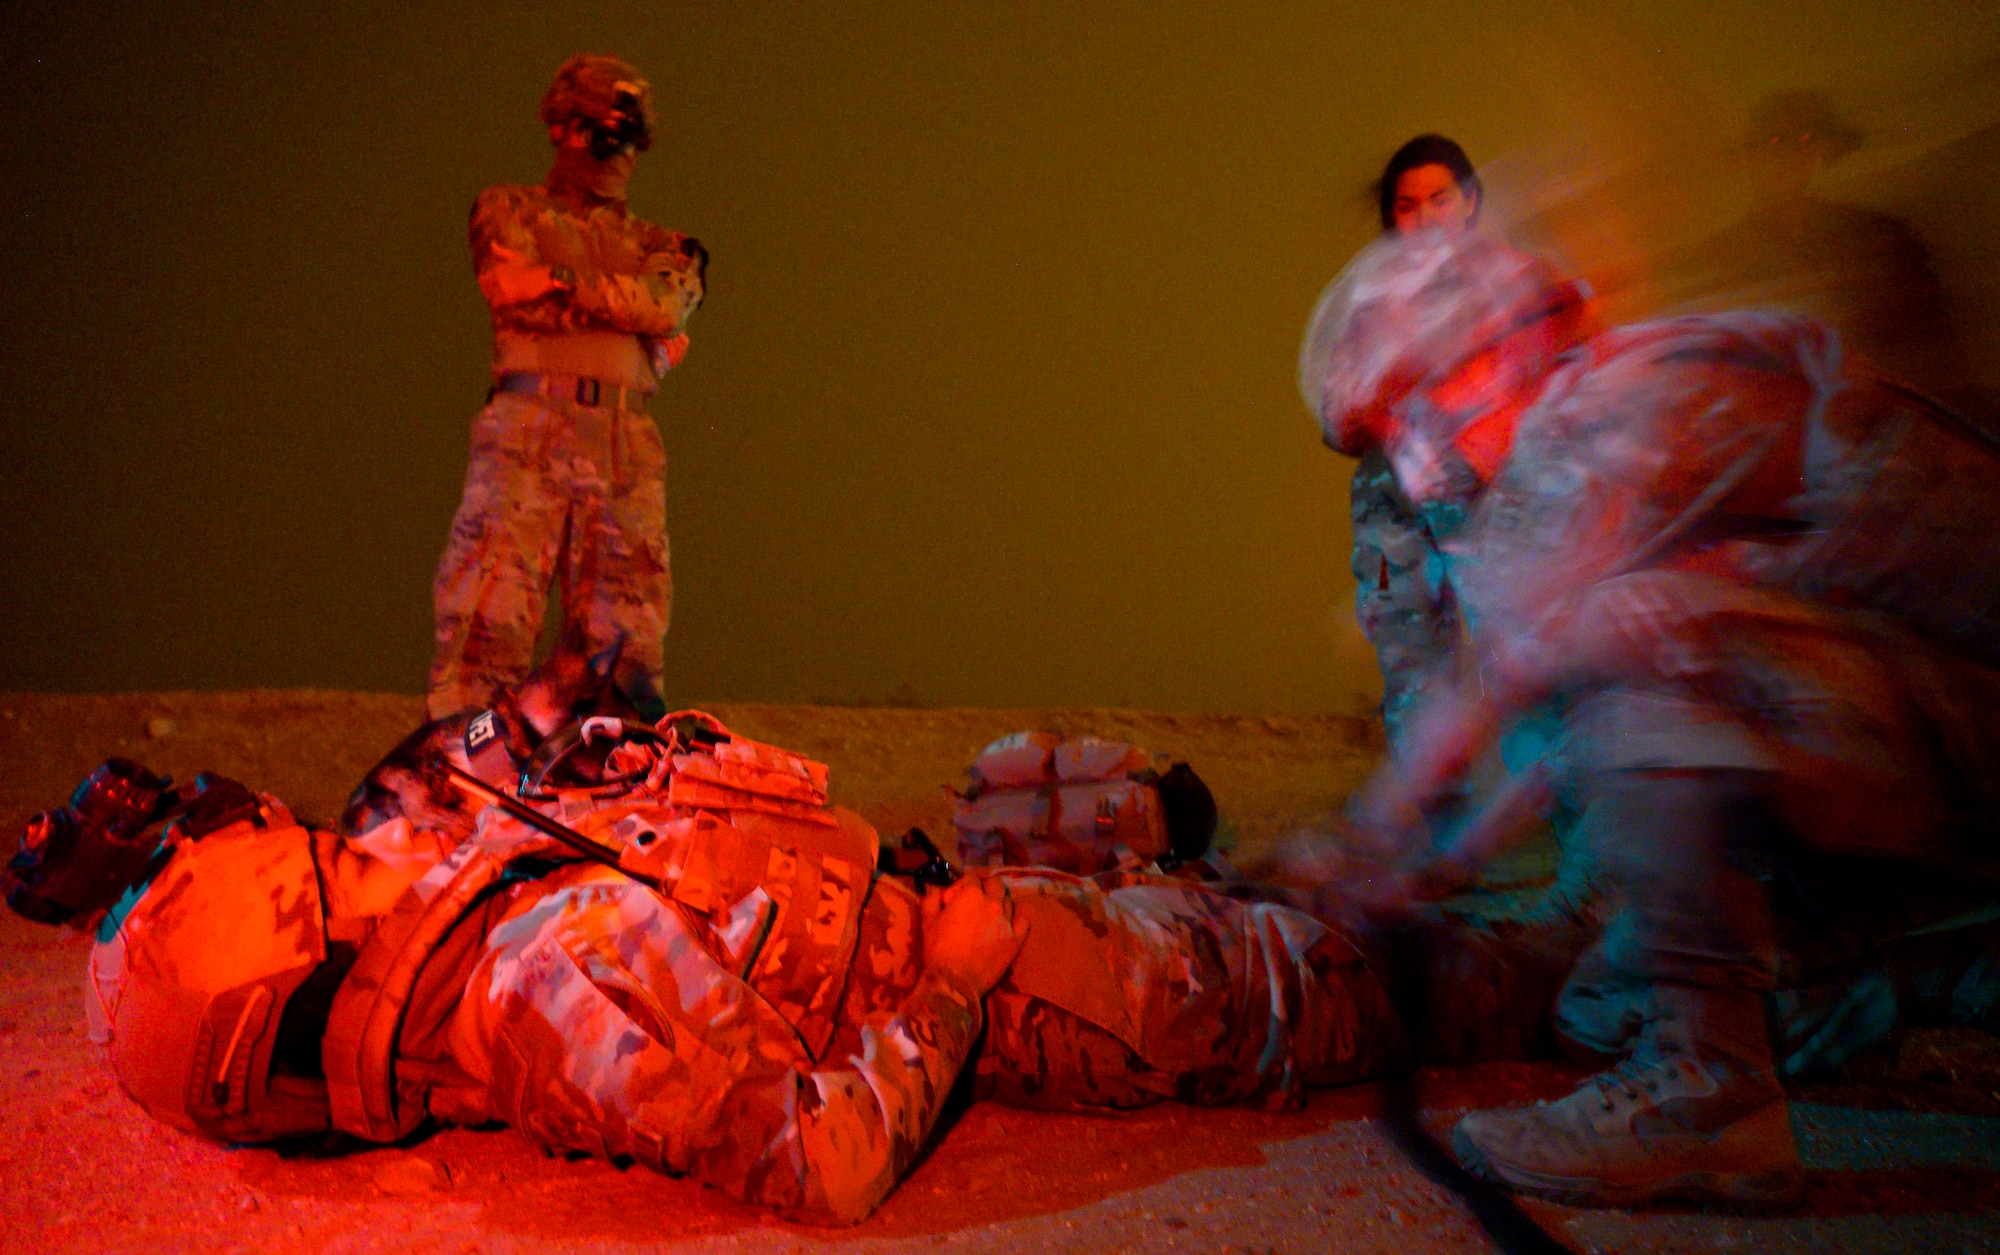 U.S. Air Force Staff Sgt. Maria Delgadillo, a military working dog handler with the 378th Expeditionary Security Forces Squadron, and her MWD, Rony, receive simulated medical care during a quick response training event in blackout conditions at Prince Sultan Air Base, Kingdom of Saudi Arabia, June 12, 2021. PSAB Explosive Ordnance Disposal, Security Forces and Medical personnel participated in integrated training to bolster defensive capabilities and maintain readiness at all times. (U.S. Air Force photo by Senior Airmen Samuel Earick)